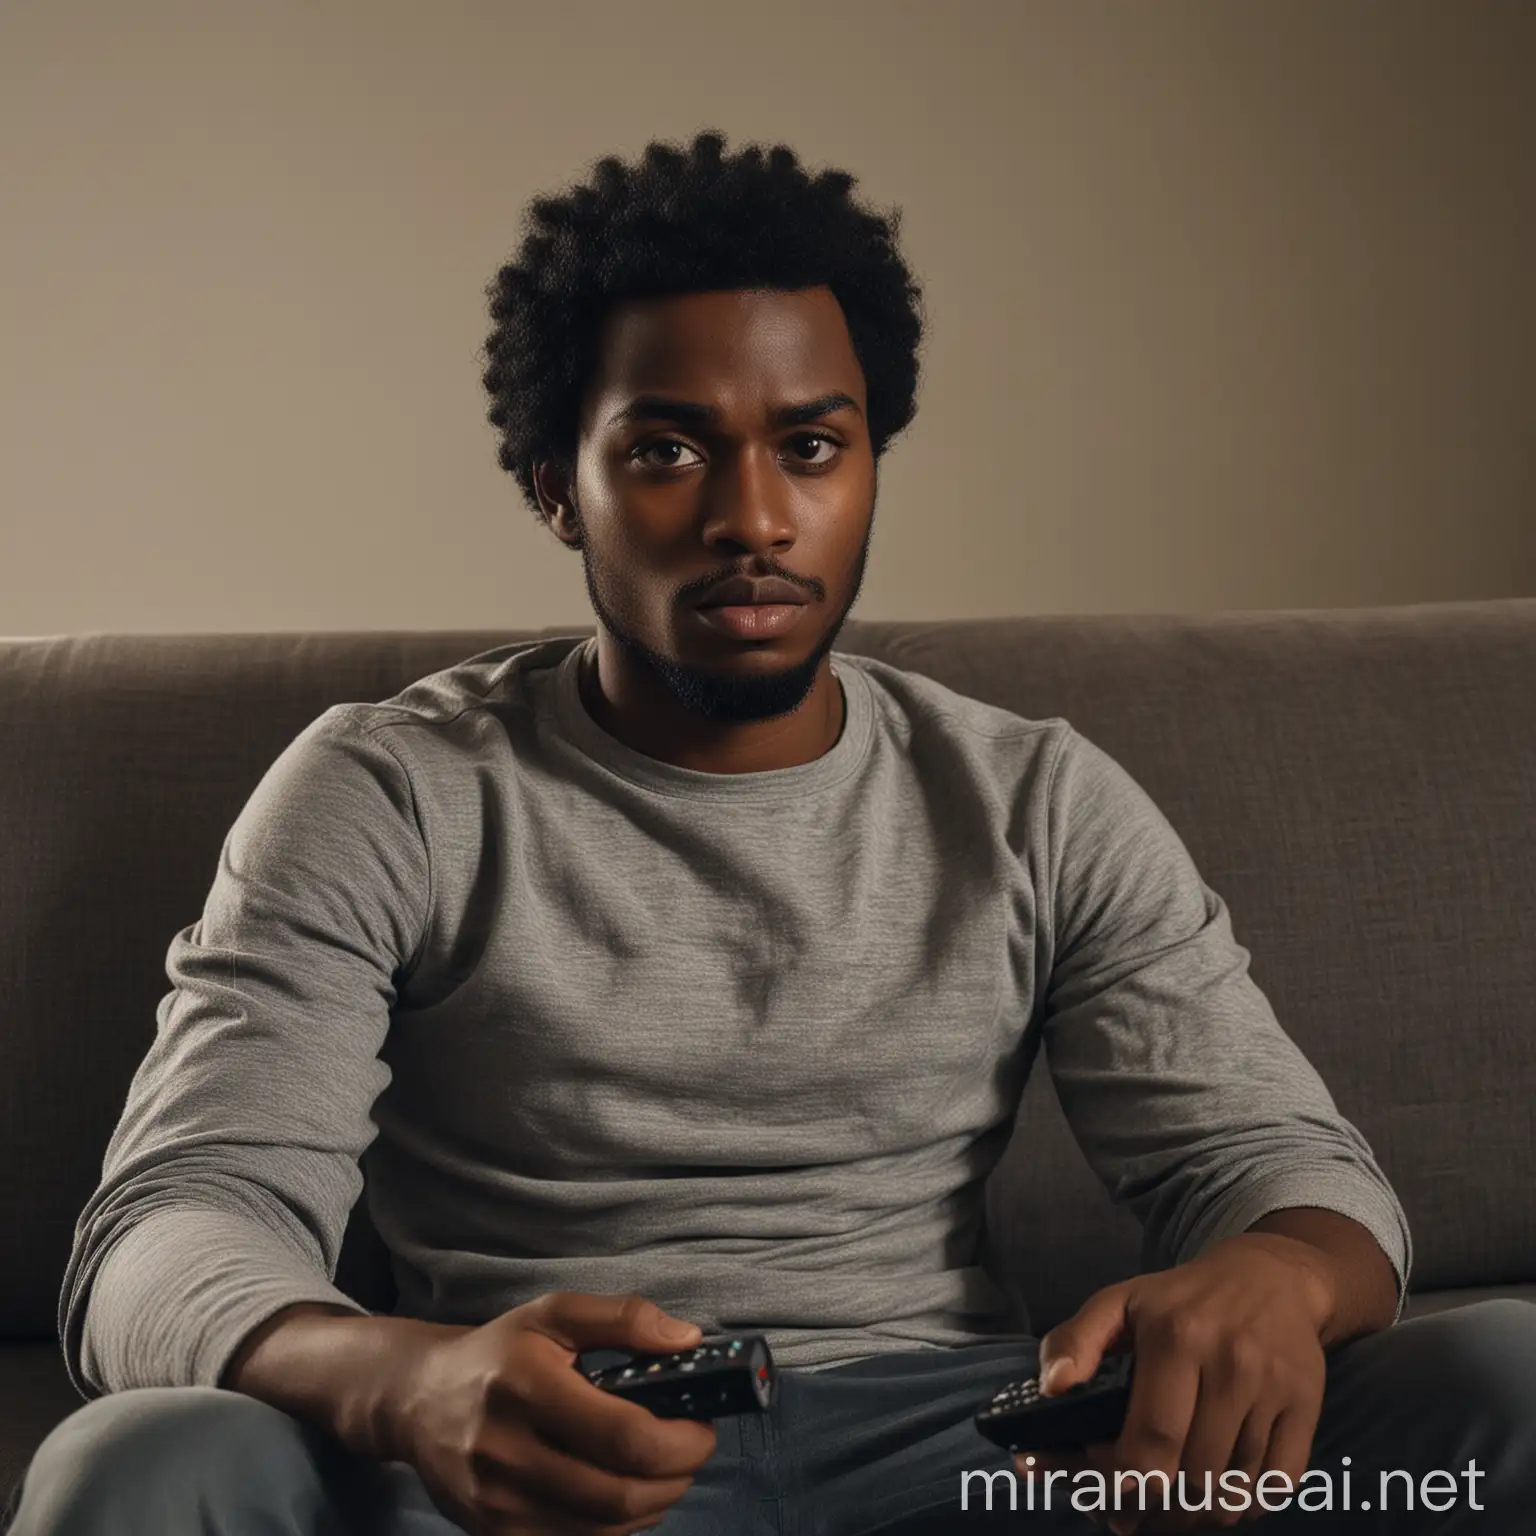 Serious Black Man Holding Remote on Couch